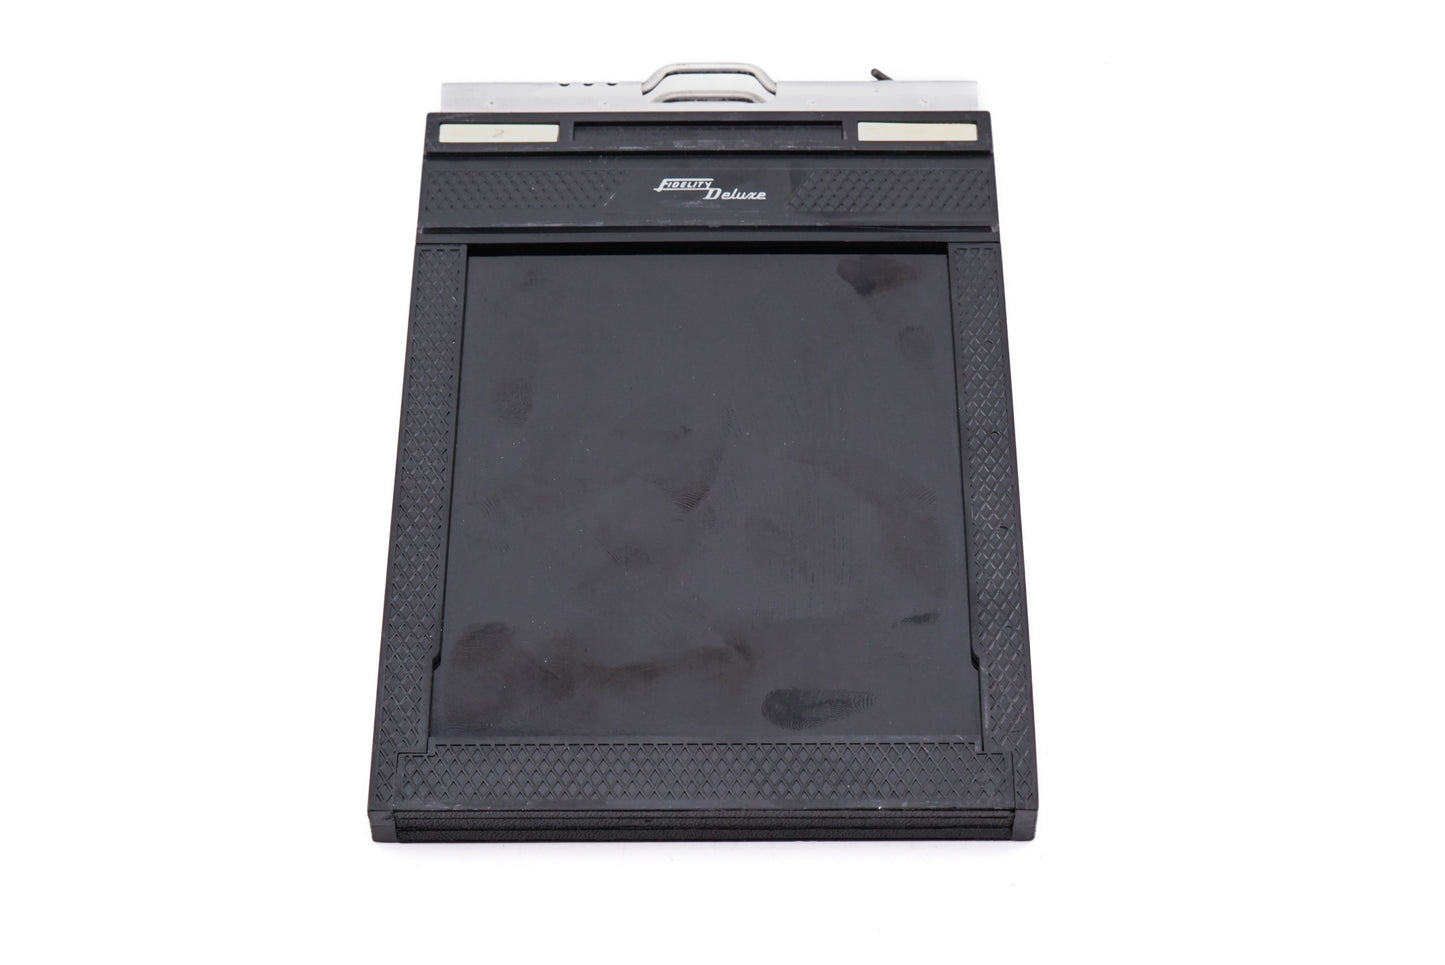 Fidelity Deluxe 4x5" Cut Film Holder - Accessory